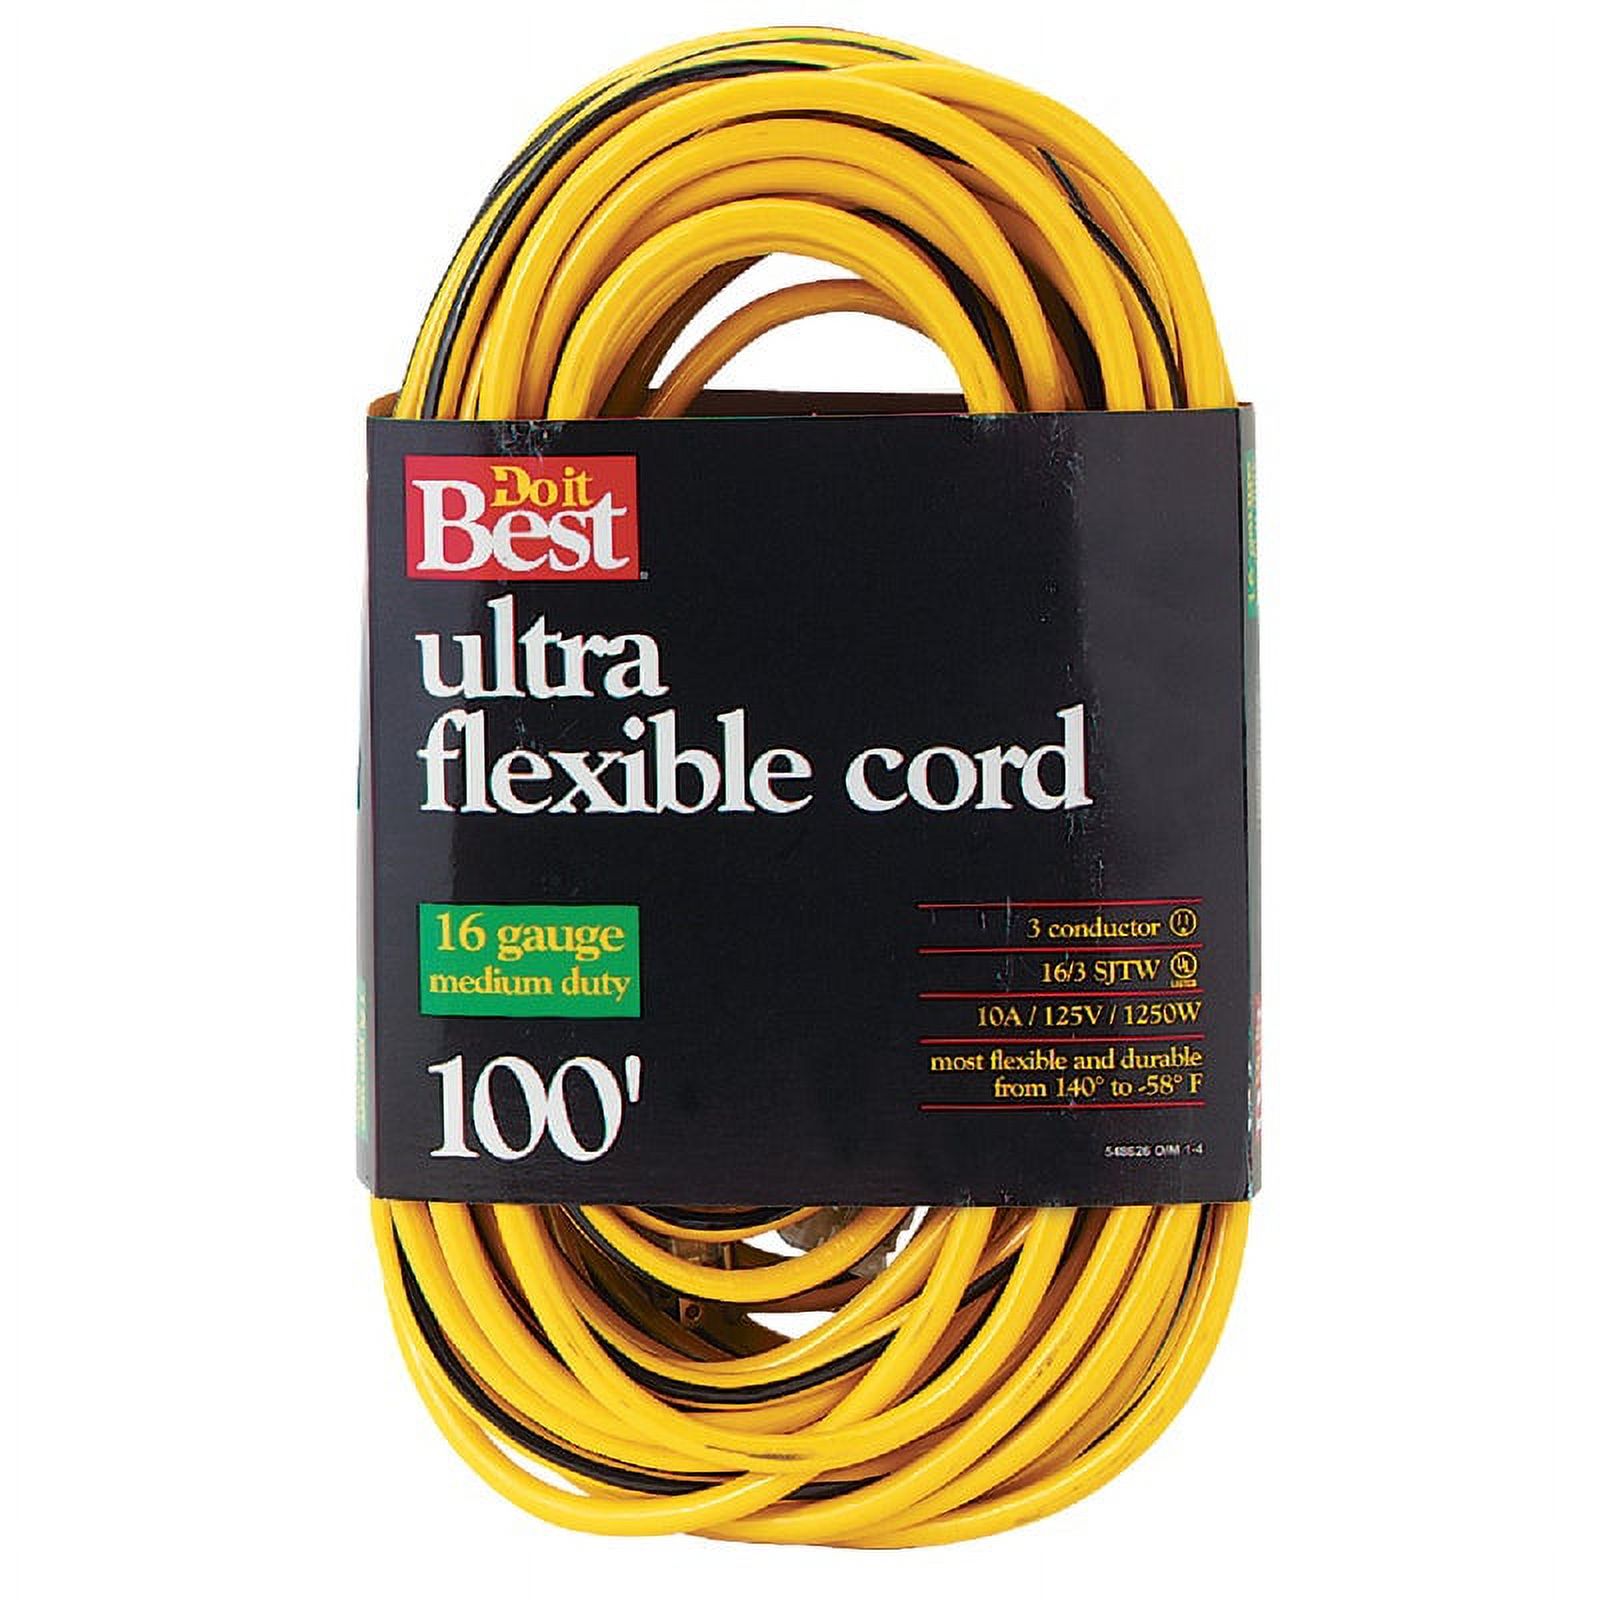 Do it Best 100 Ft. 16/3 Medium-Duty Extension Cord - image 1 of 2